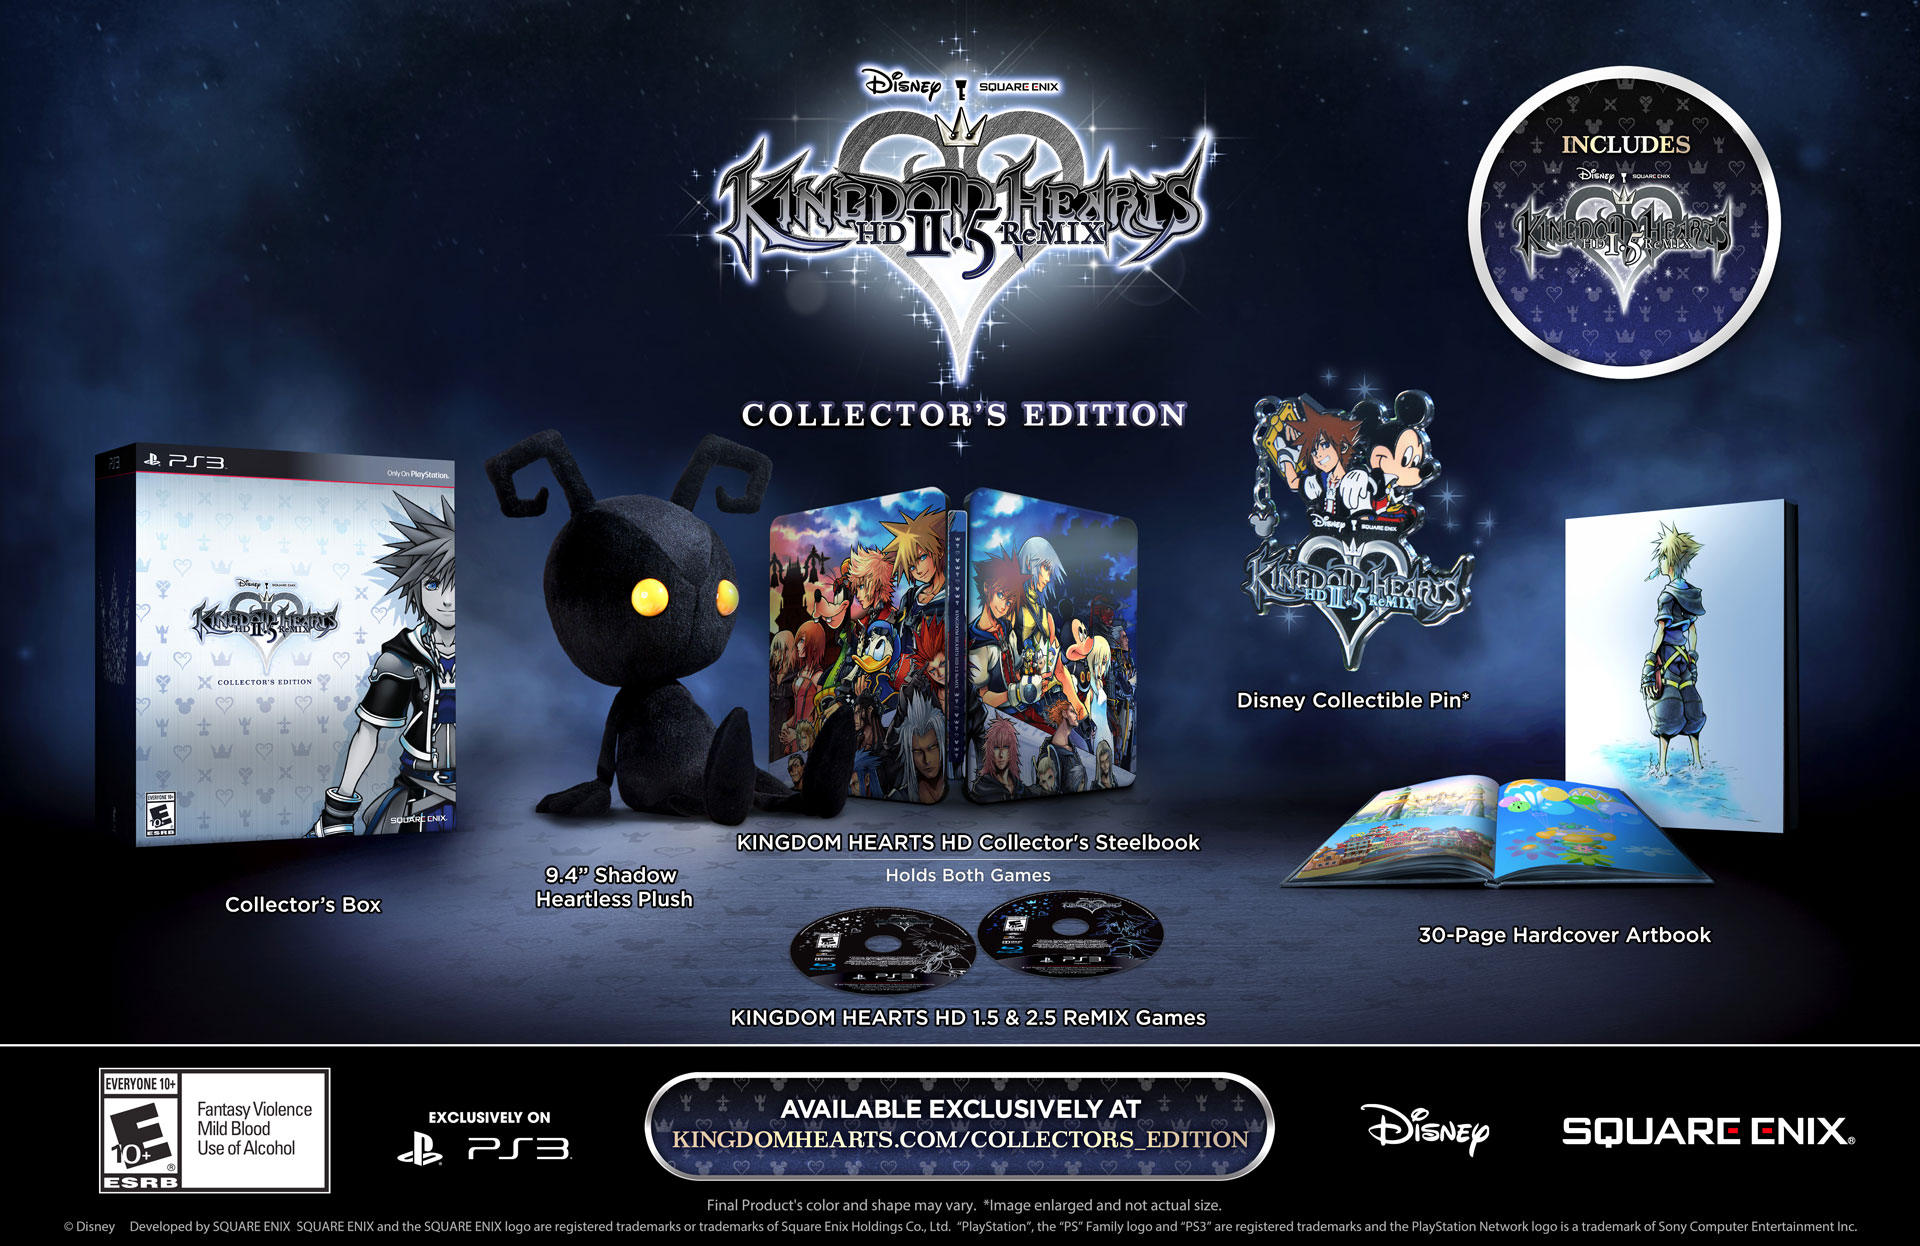 “Kingdom Hearts 2.5 HD Remix Collector’s Edition” Announced - Includes 1.5 & 2.5 HD Remixes